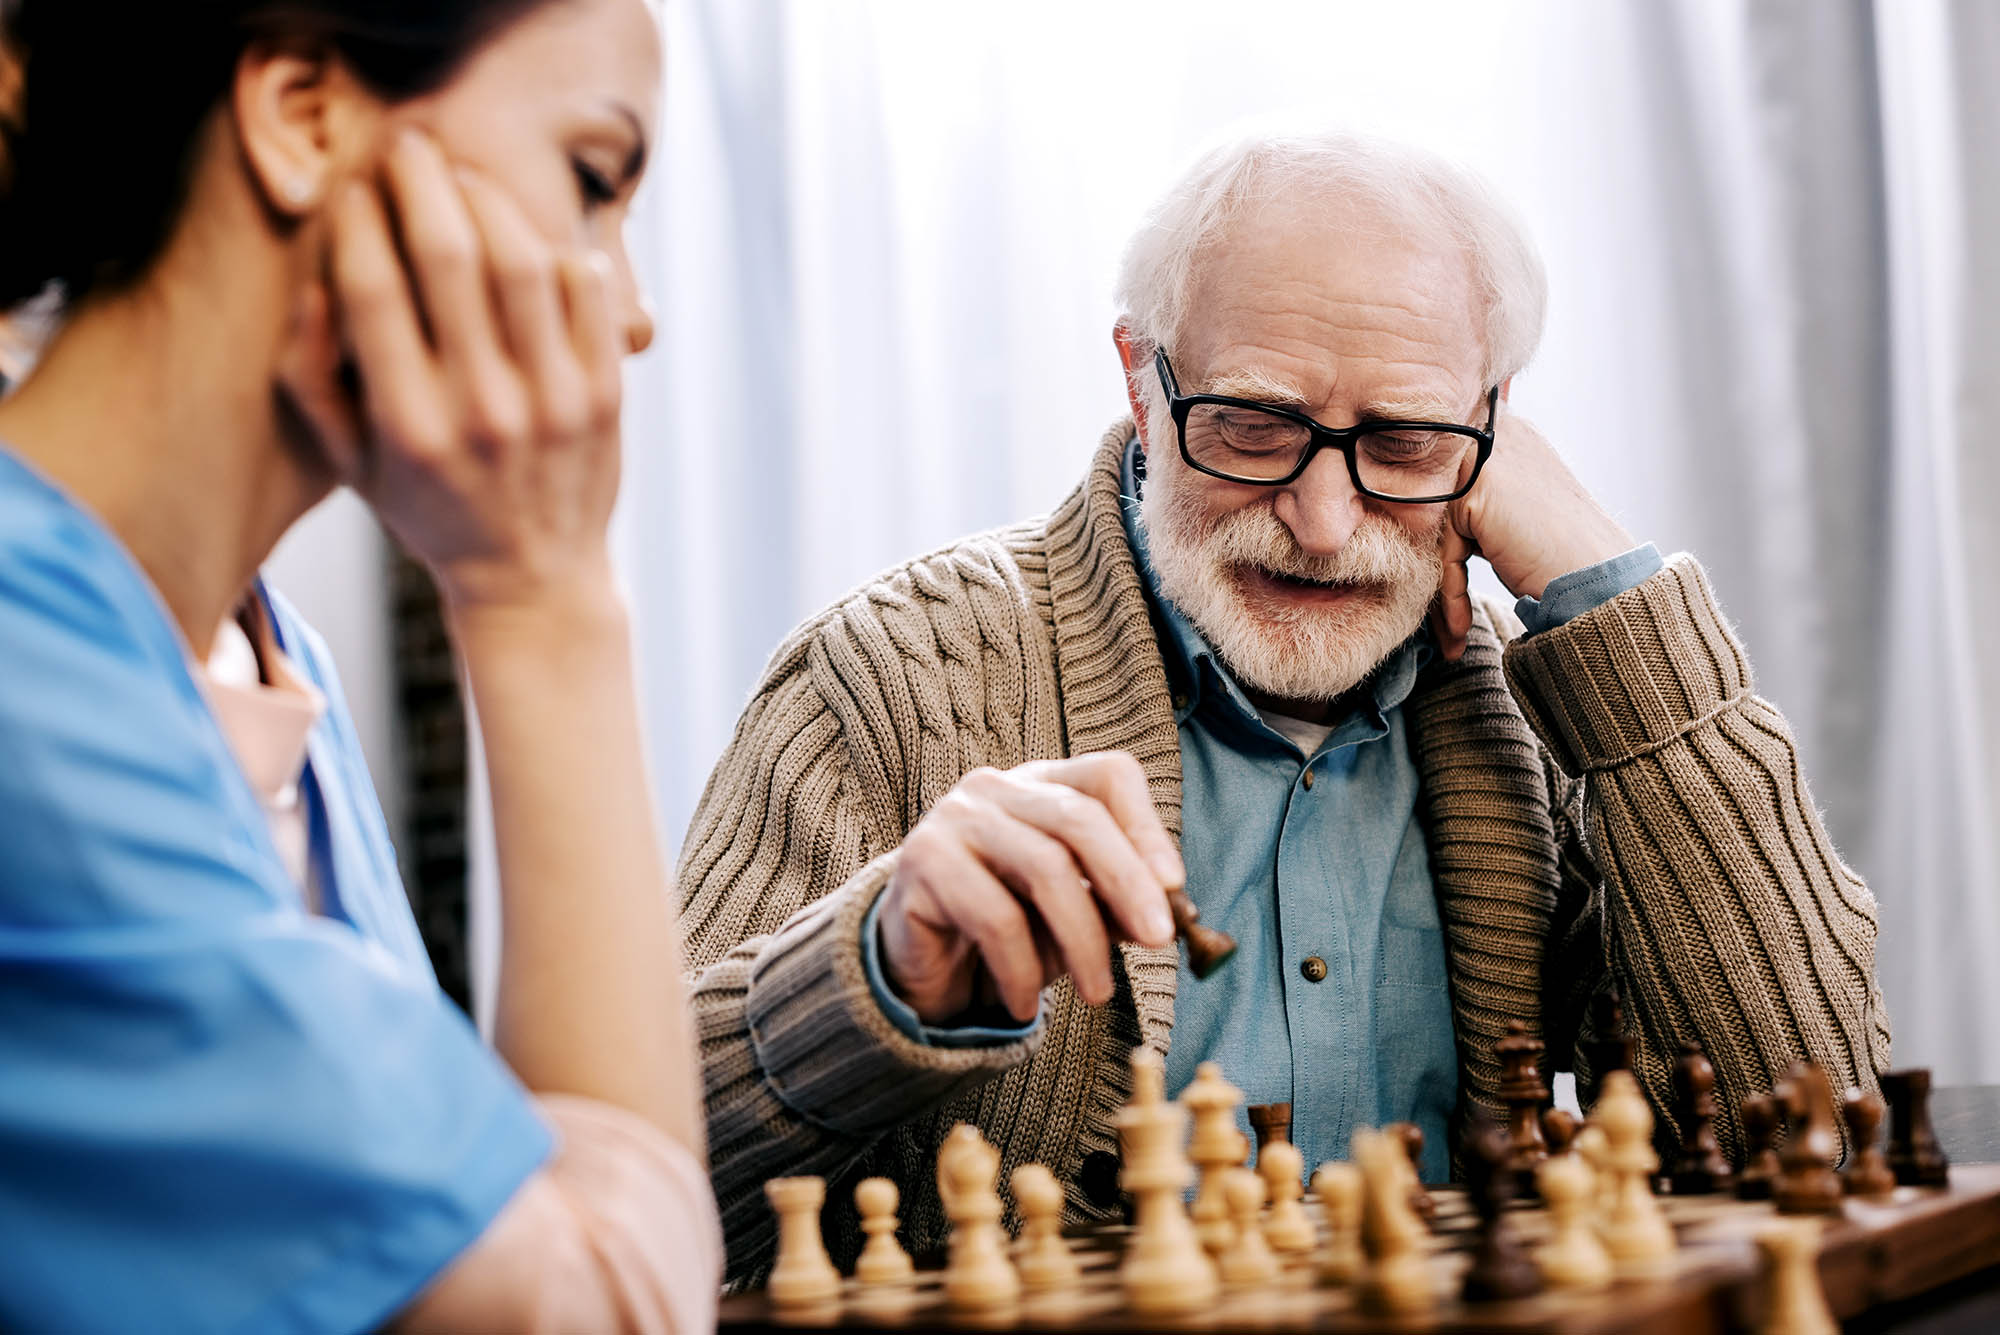 BRPROUD  Ward off dementia with a game of chess, researchers say